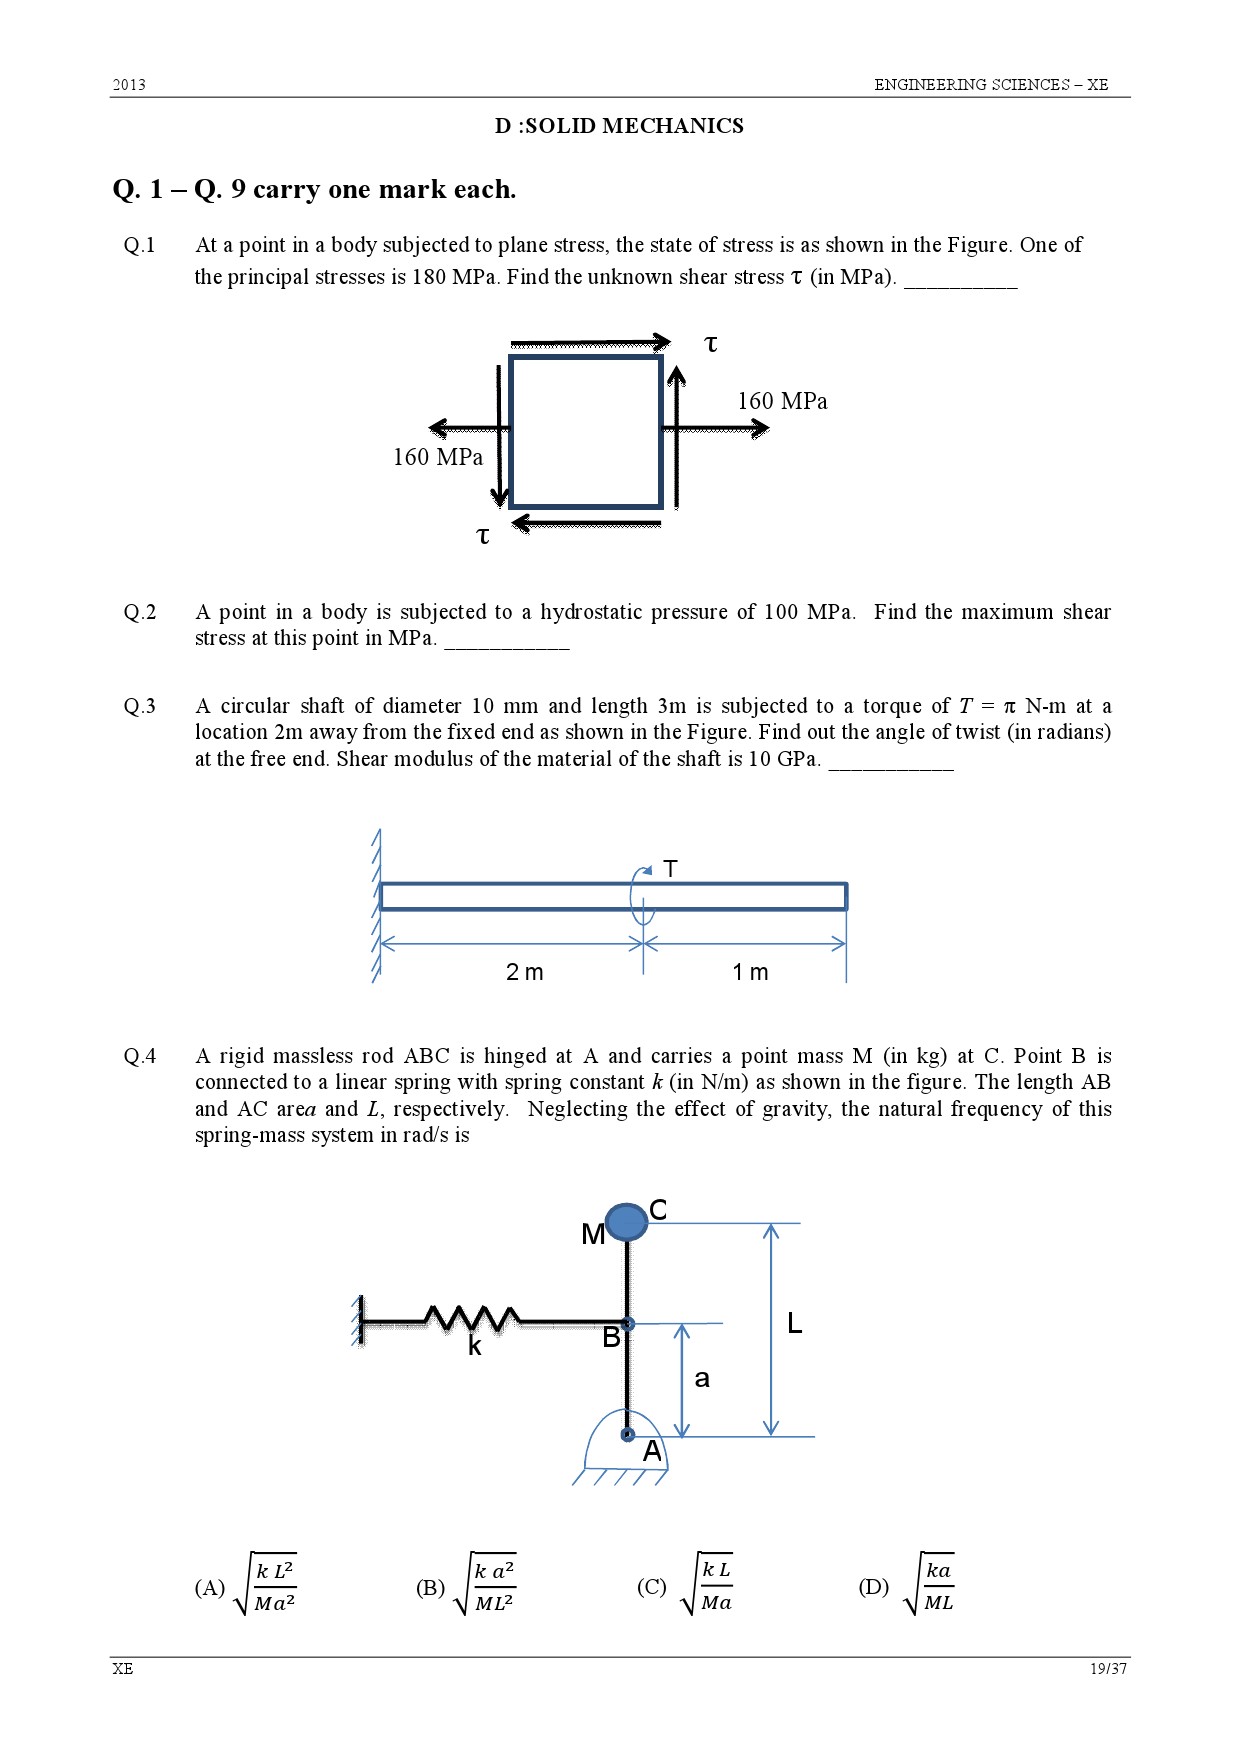 GATE Exam Question Paper 2013 Engineering Sciences 19